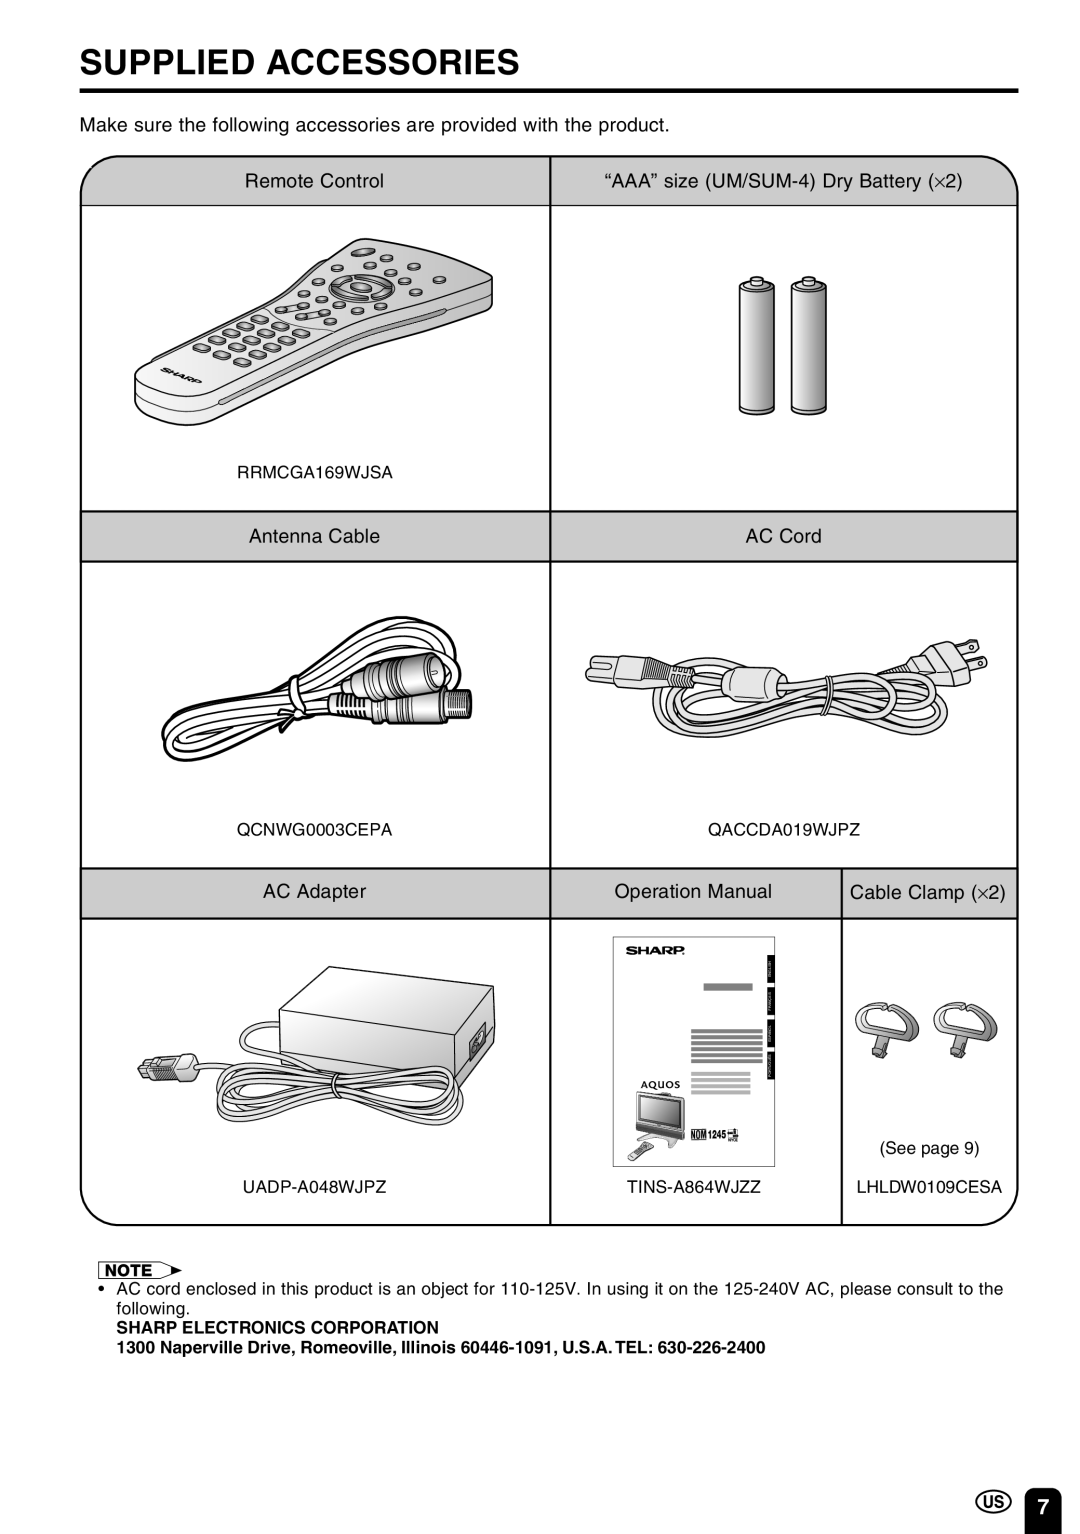 Sharp LC-22SV6U Supplied Accessories, Make sure the following accessories are provided with the product, Antenna Cable 